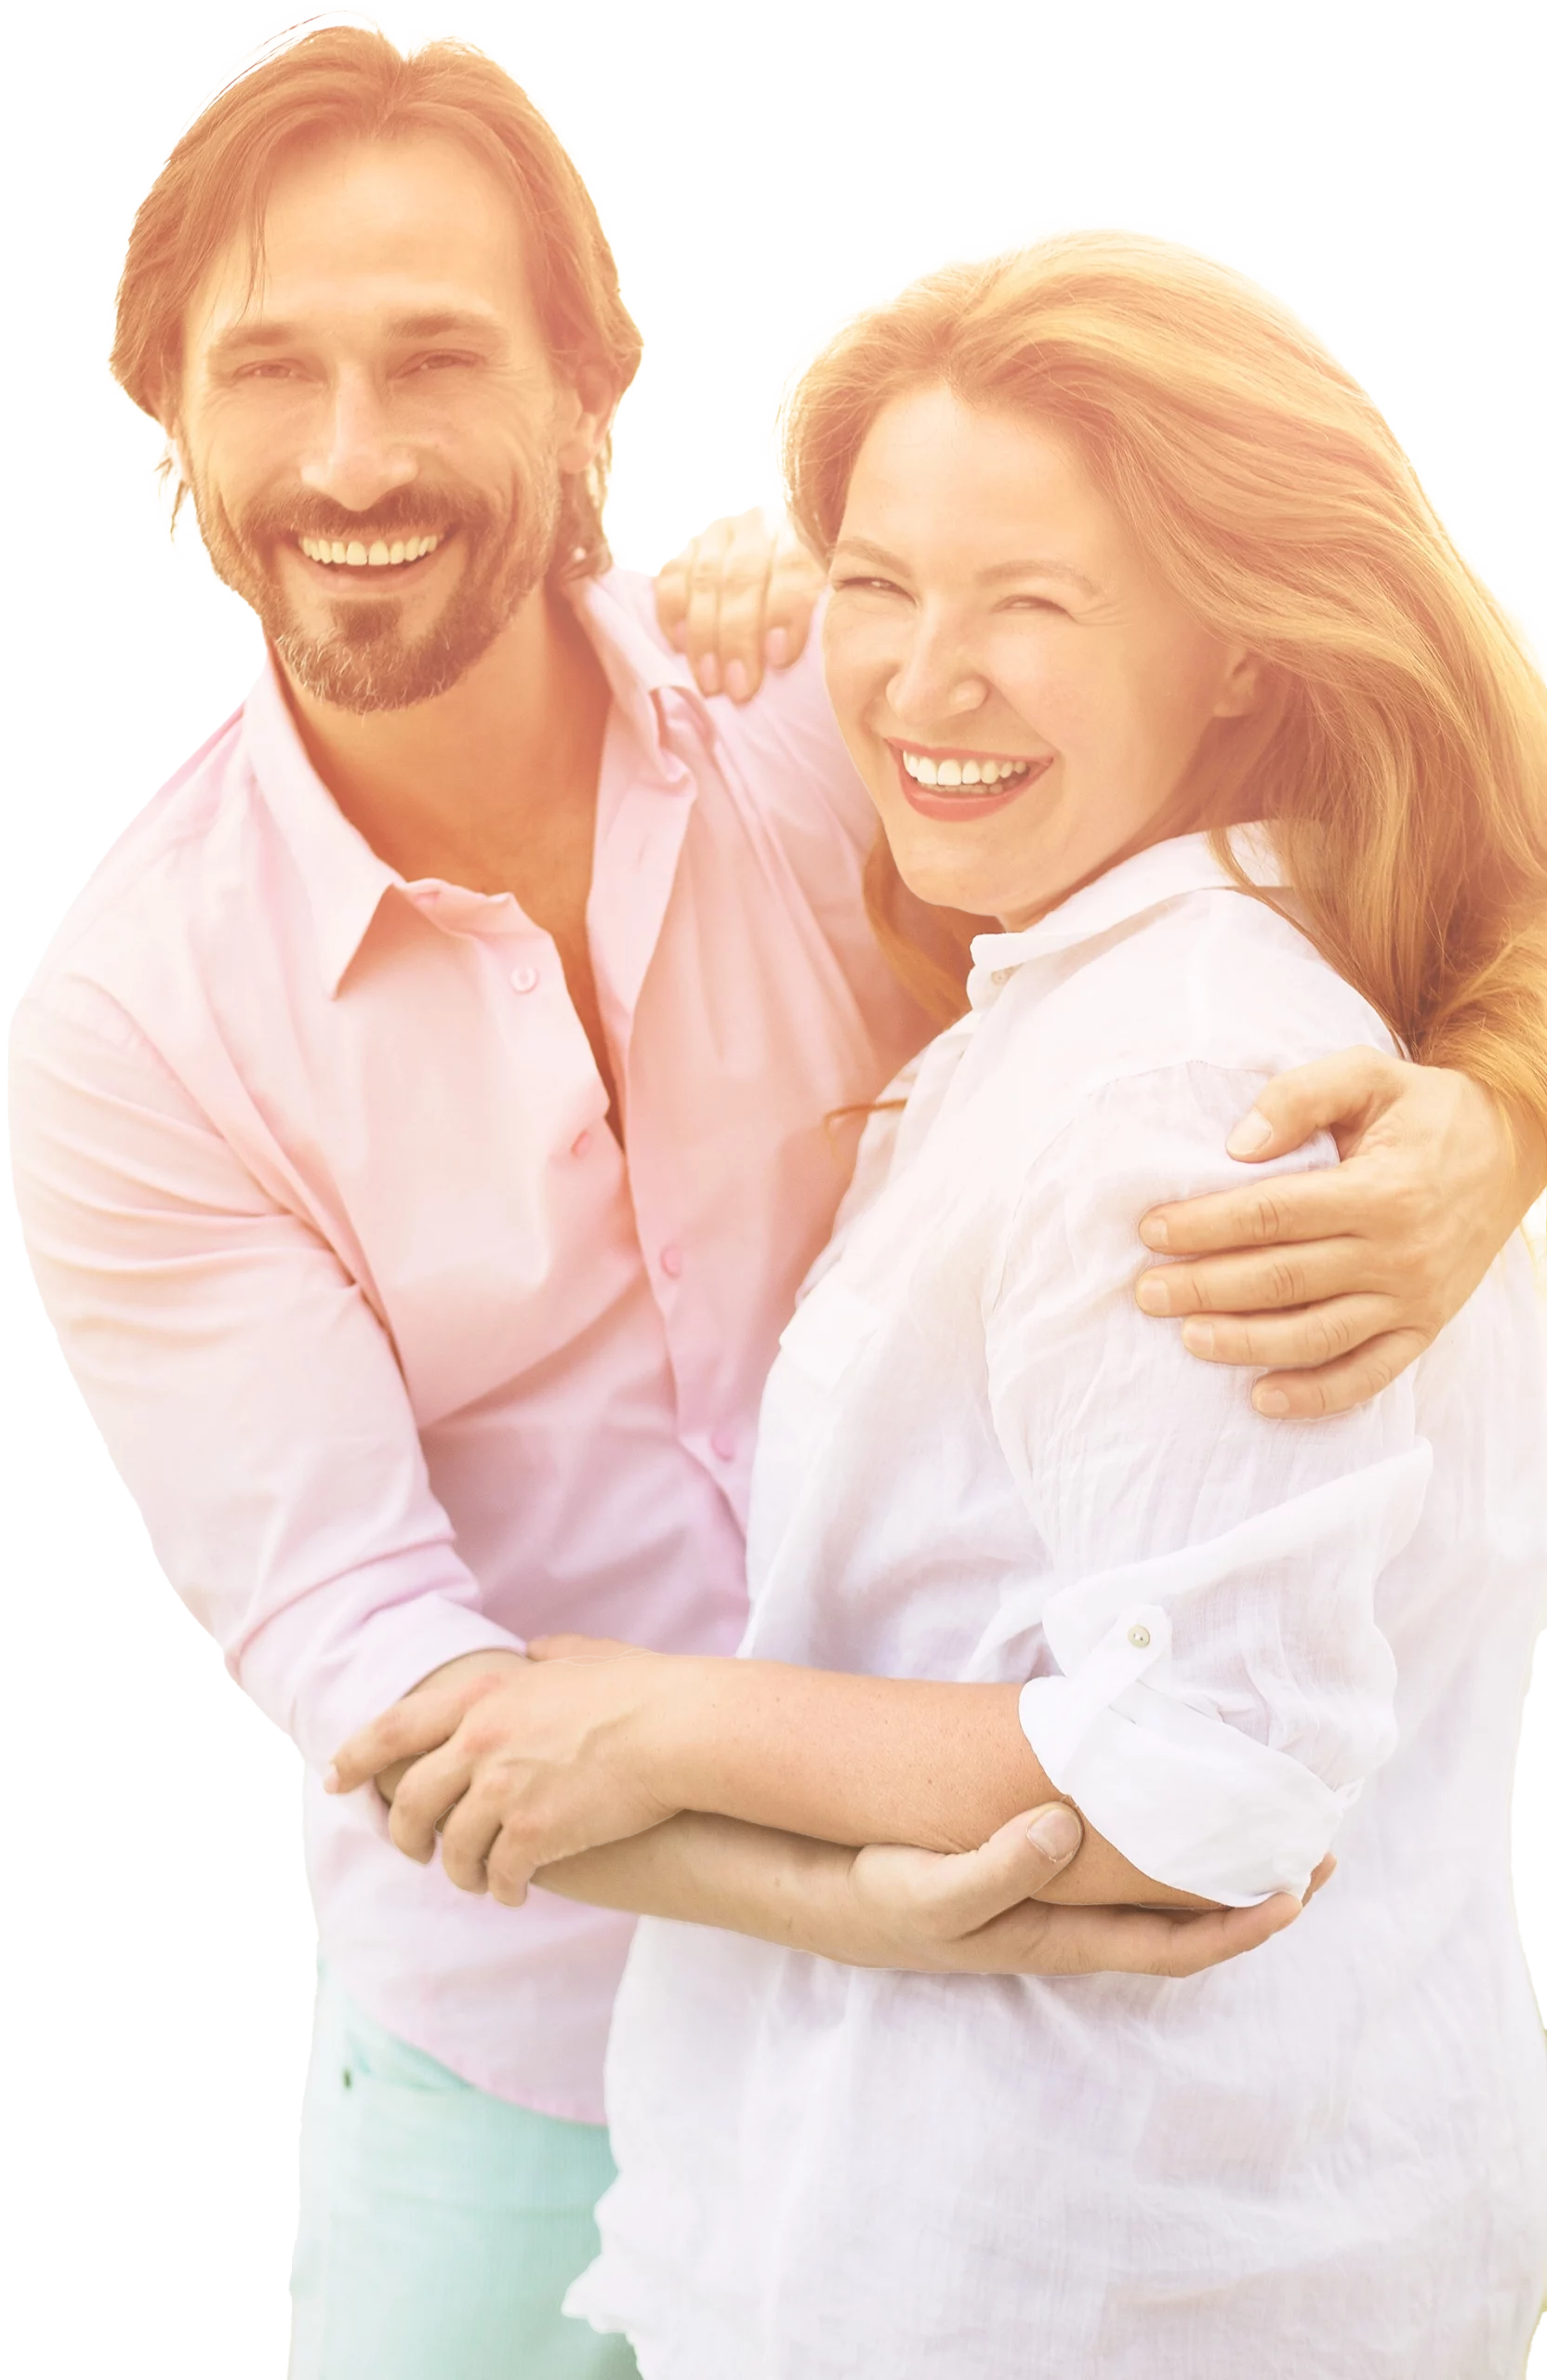 Couple smiling in warm embrace